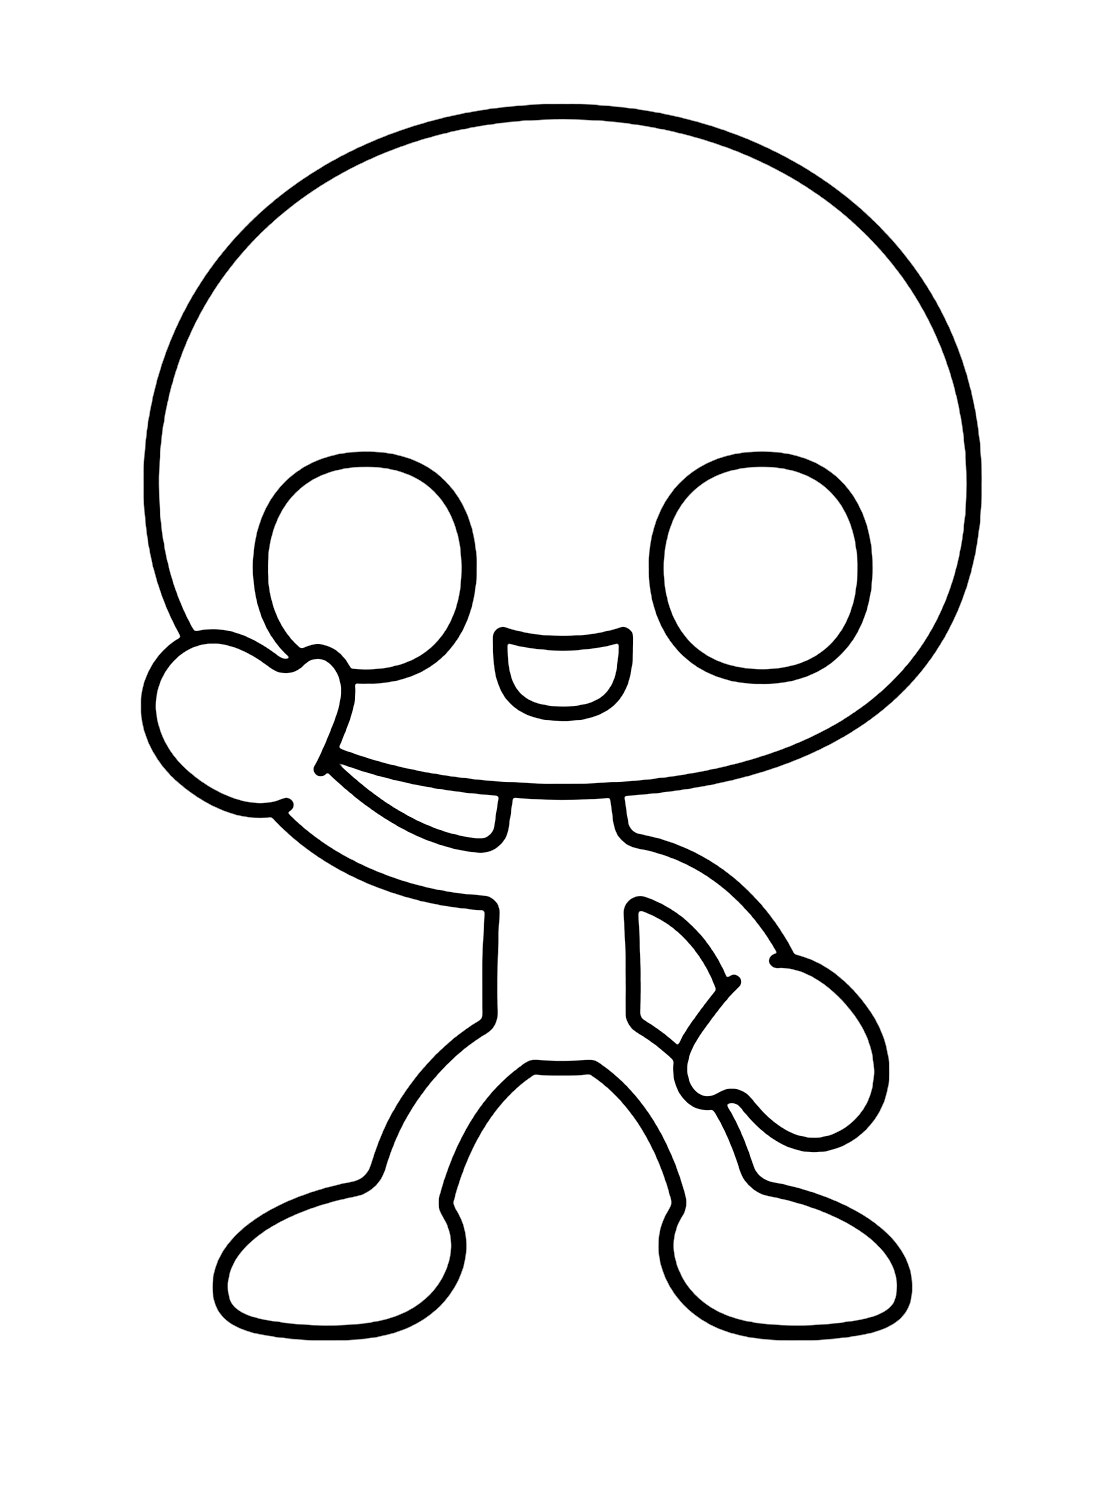 Chibi Yellow Rainbow Friends Coloring Pages - Free Printable Coloring Pages